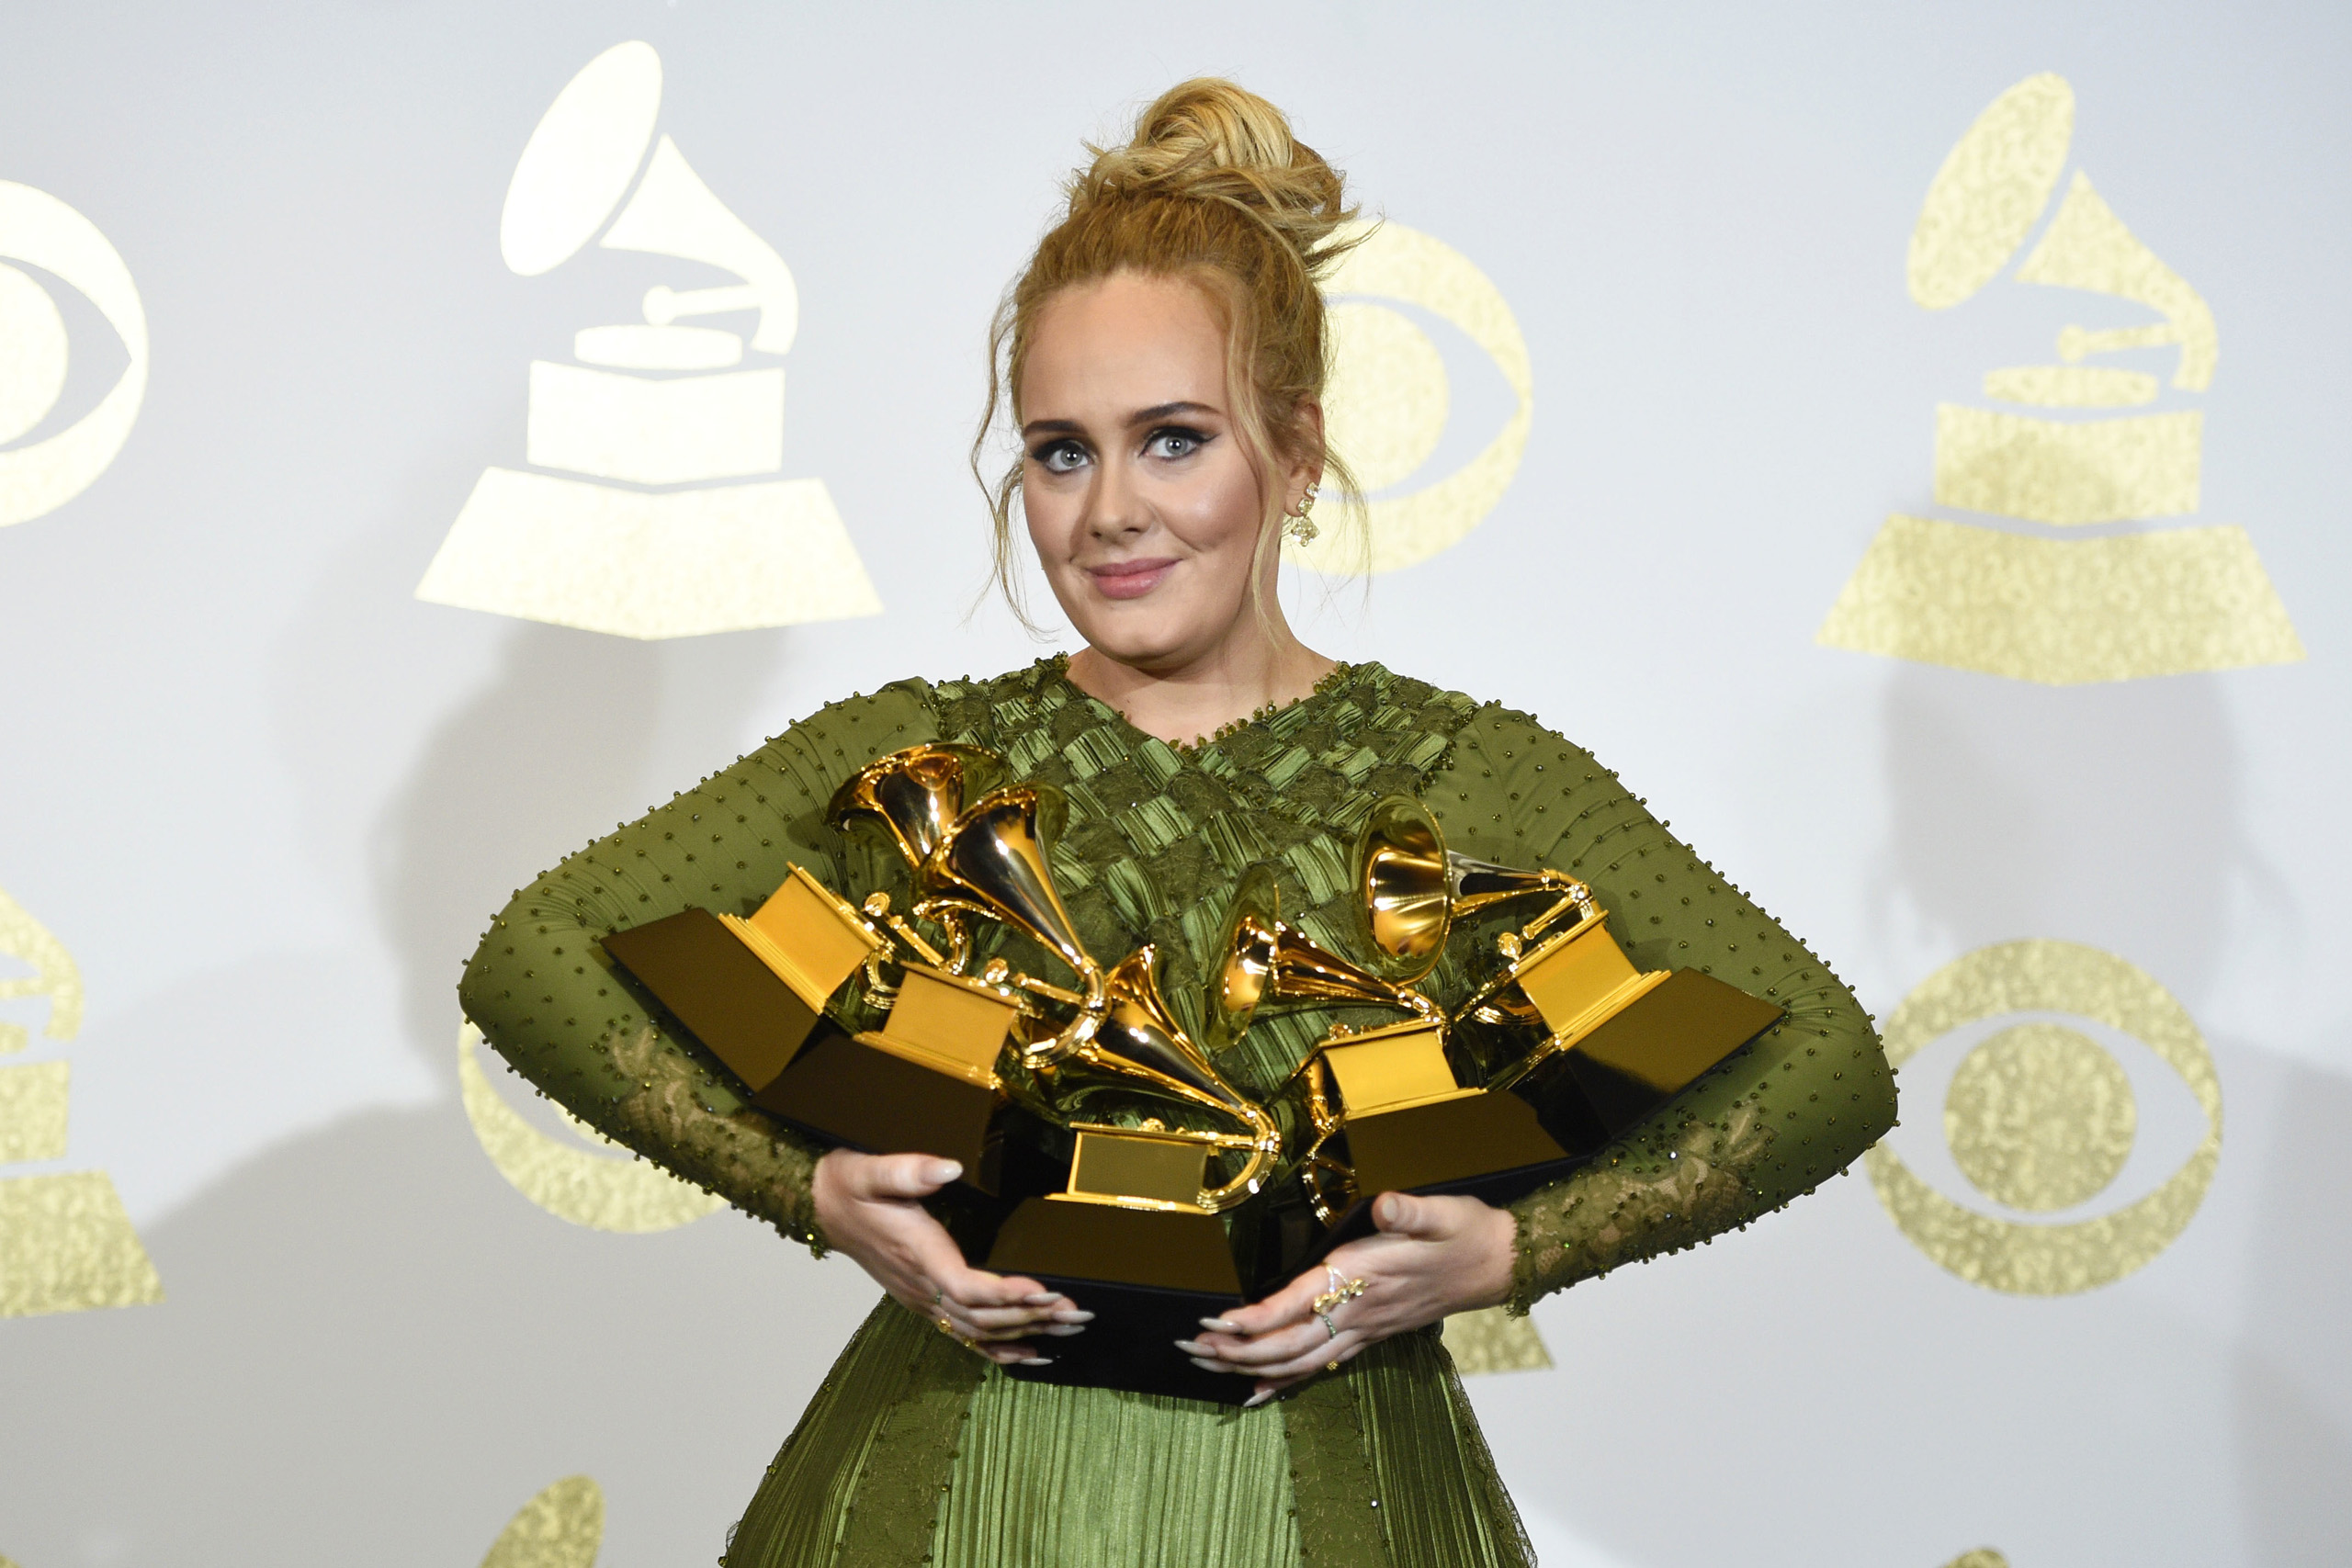 Adele poses with her five awards at the 59th annual Grammy Awards at the Staples Center on Feb. 12, 2017. (Chris Pizzello—Invision/AP)